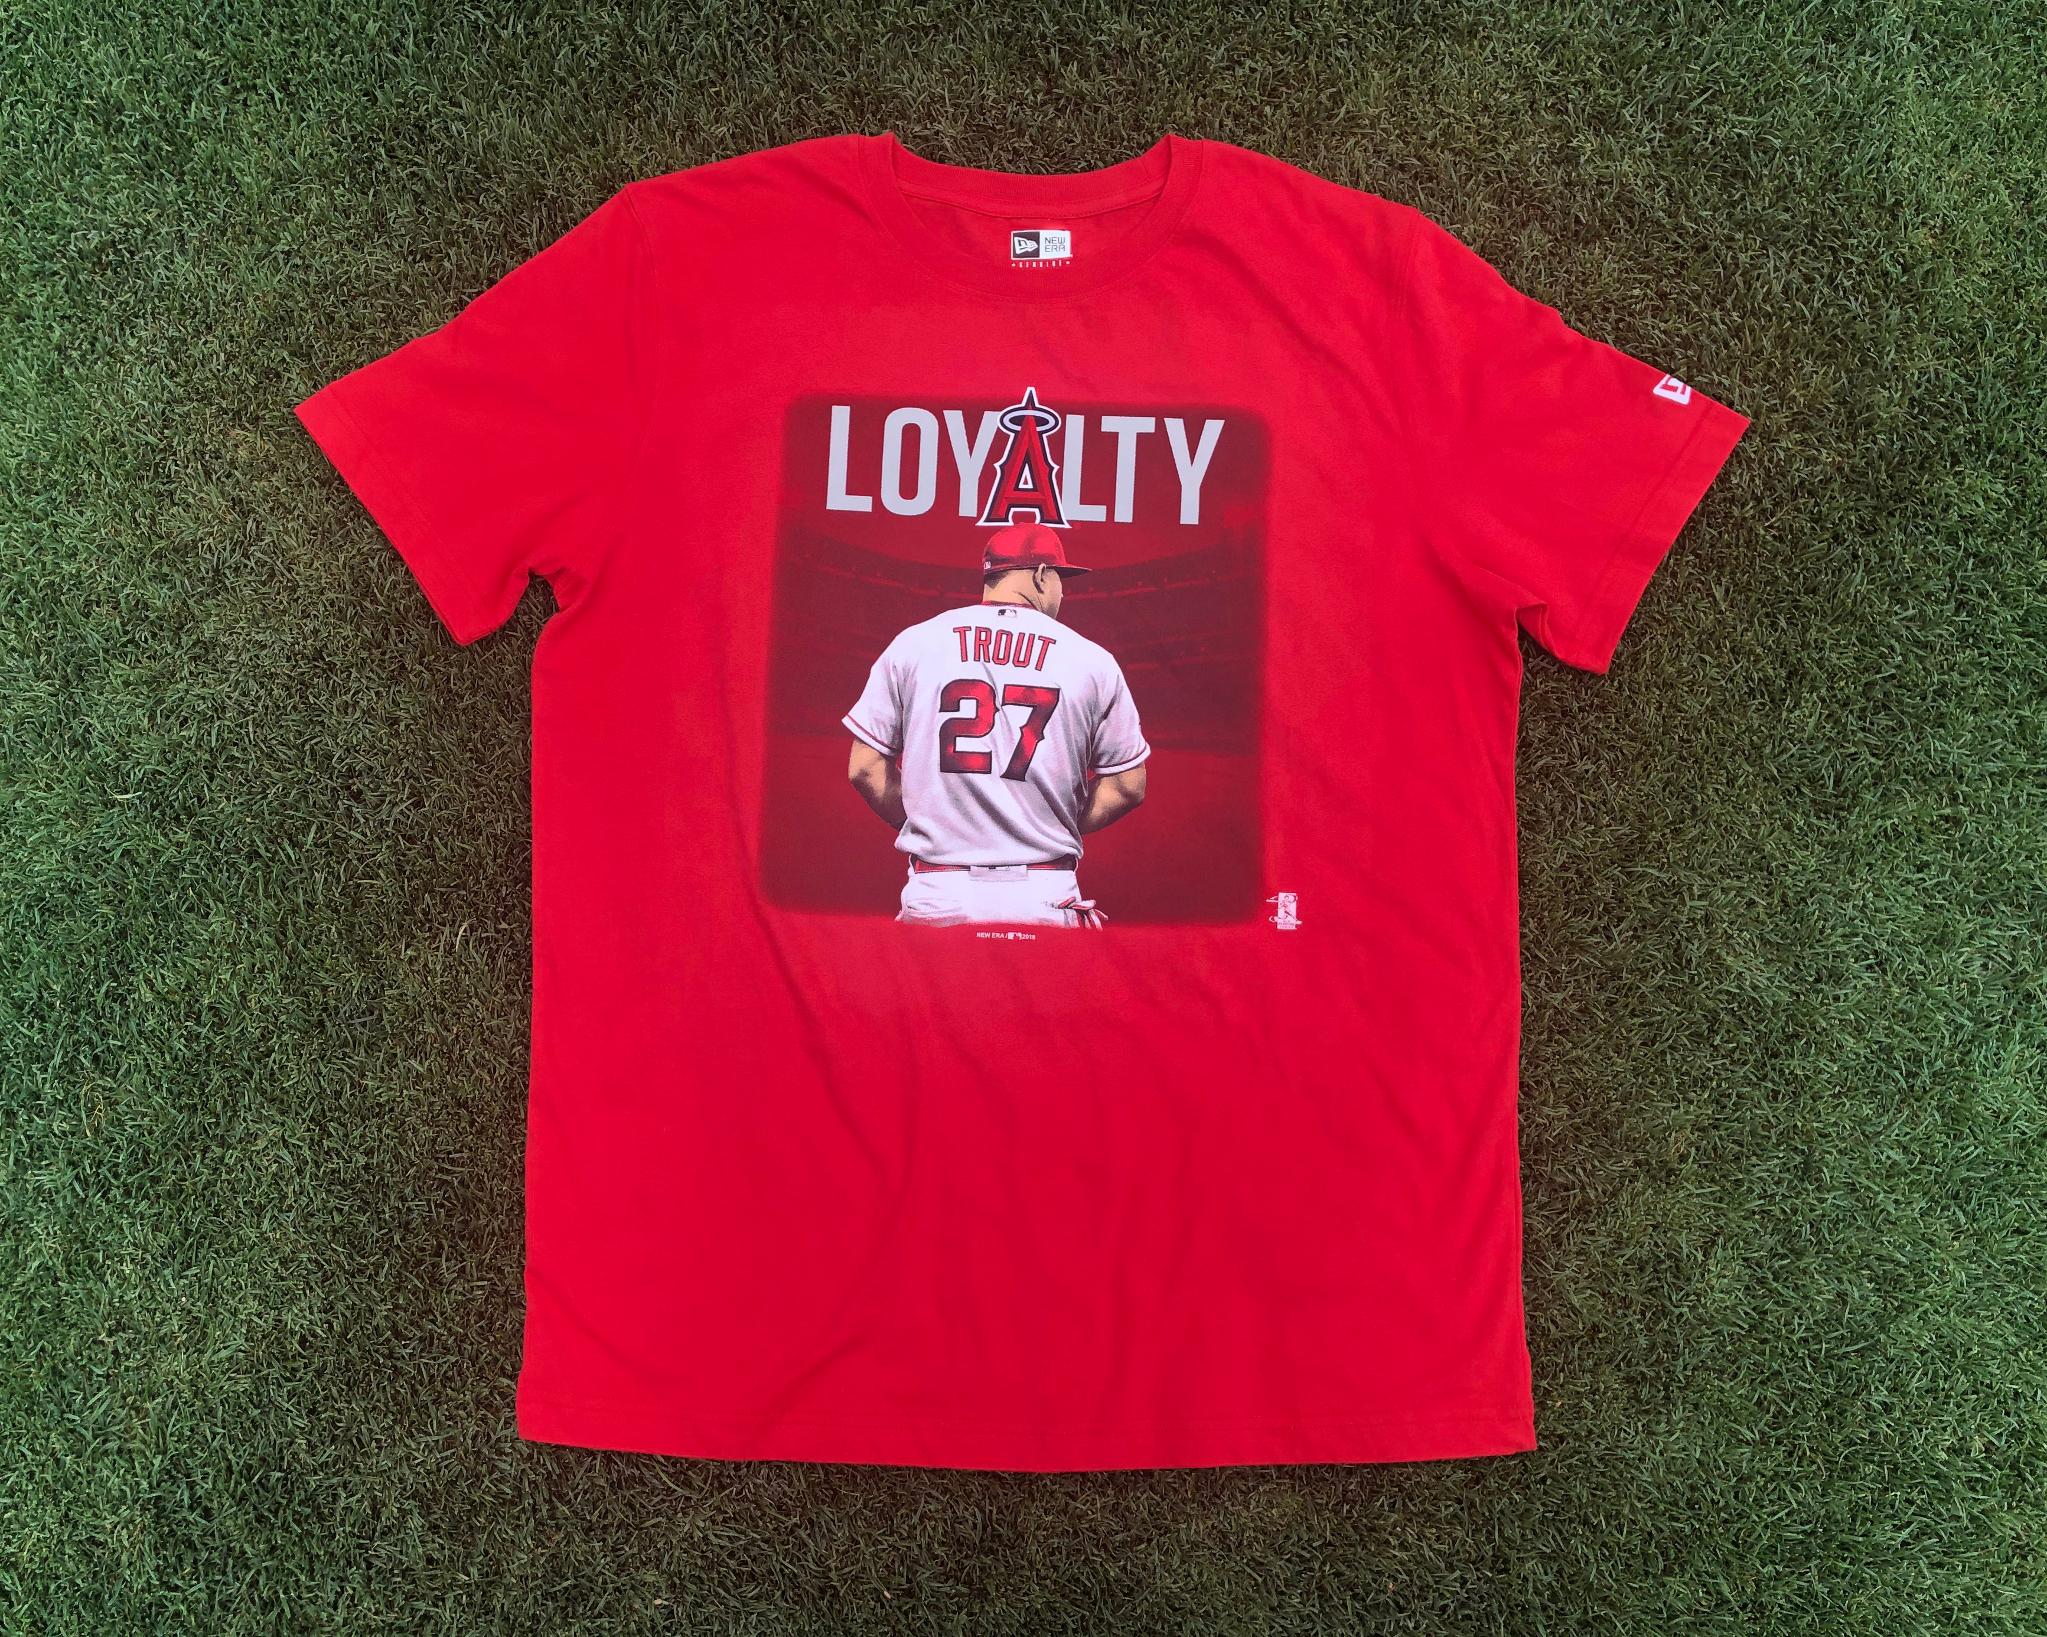 Los Angeles Angels on X: Mike Trout Loyalty T-Shirts. Now